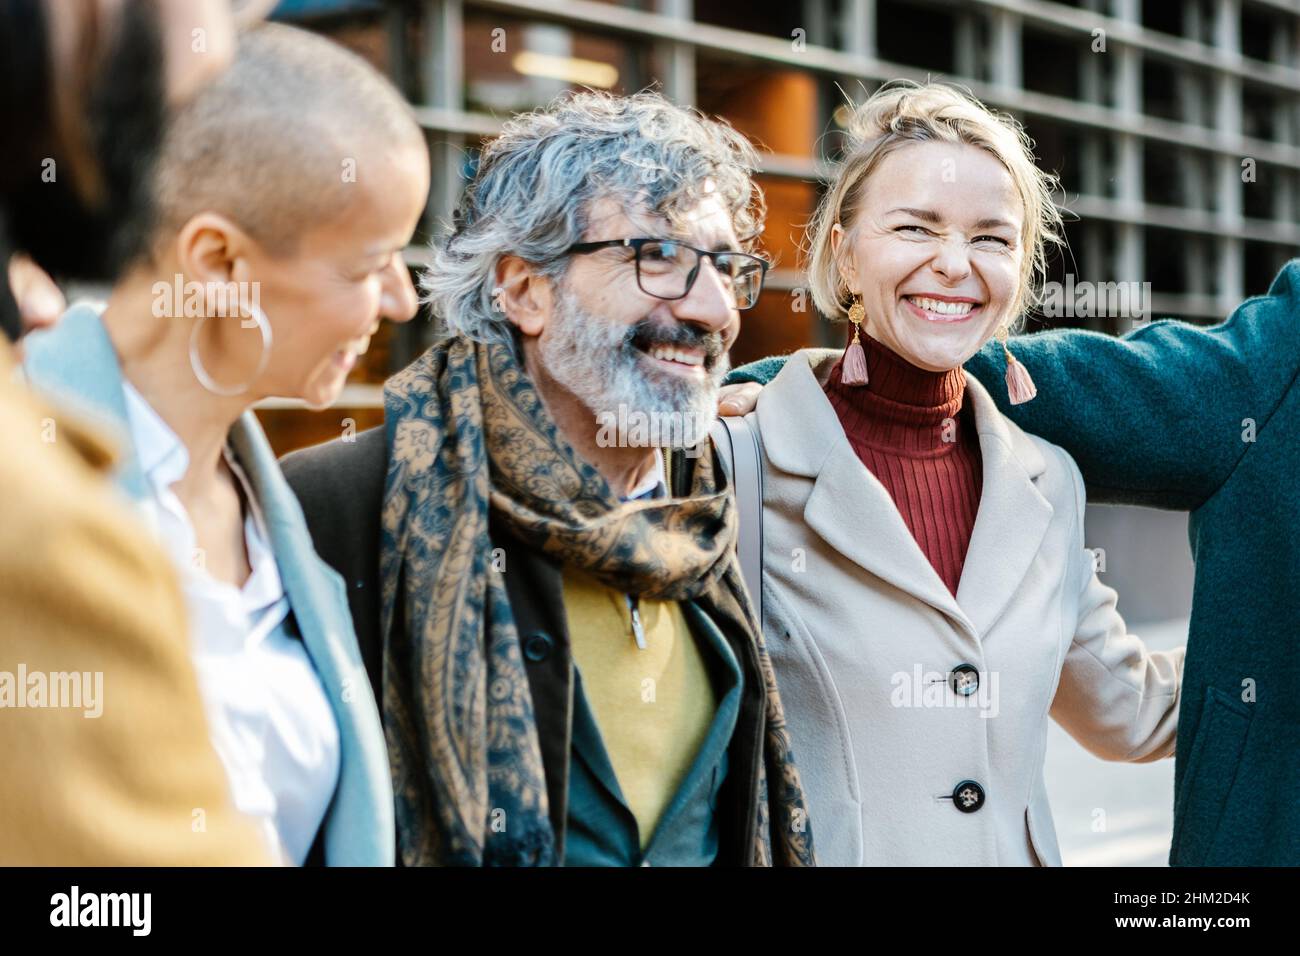 Happy multi age group of professional business people laughing together outdoors Stock Photo